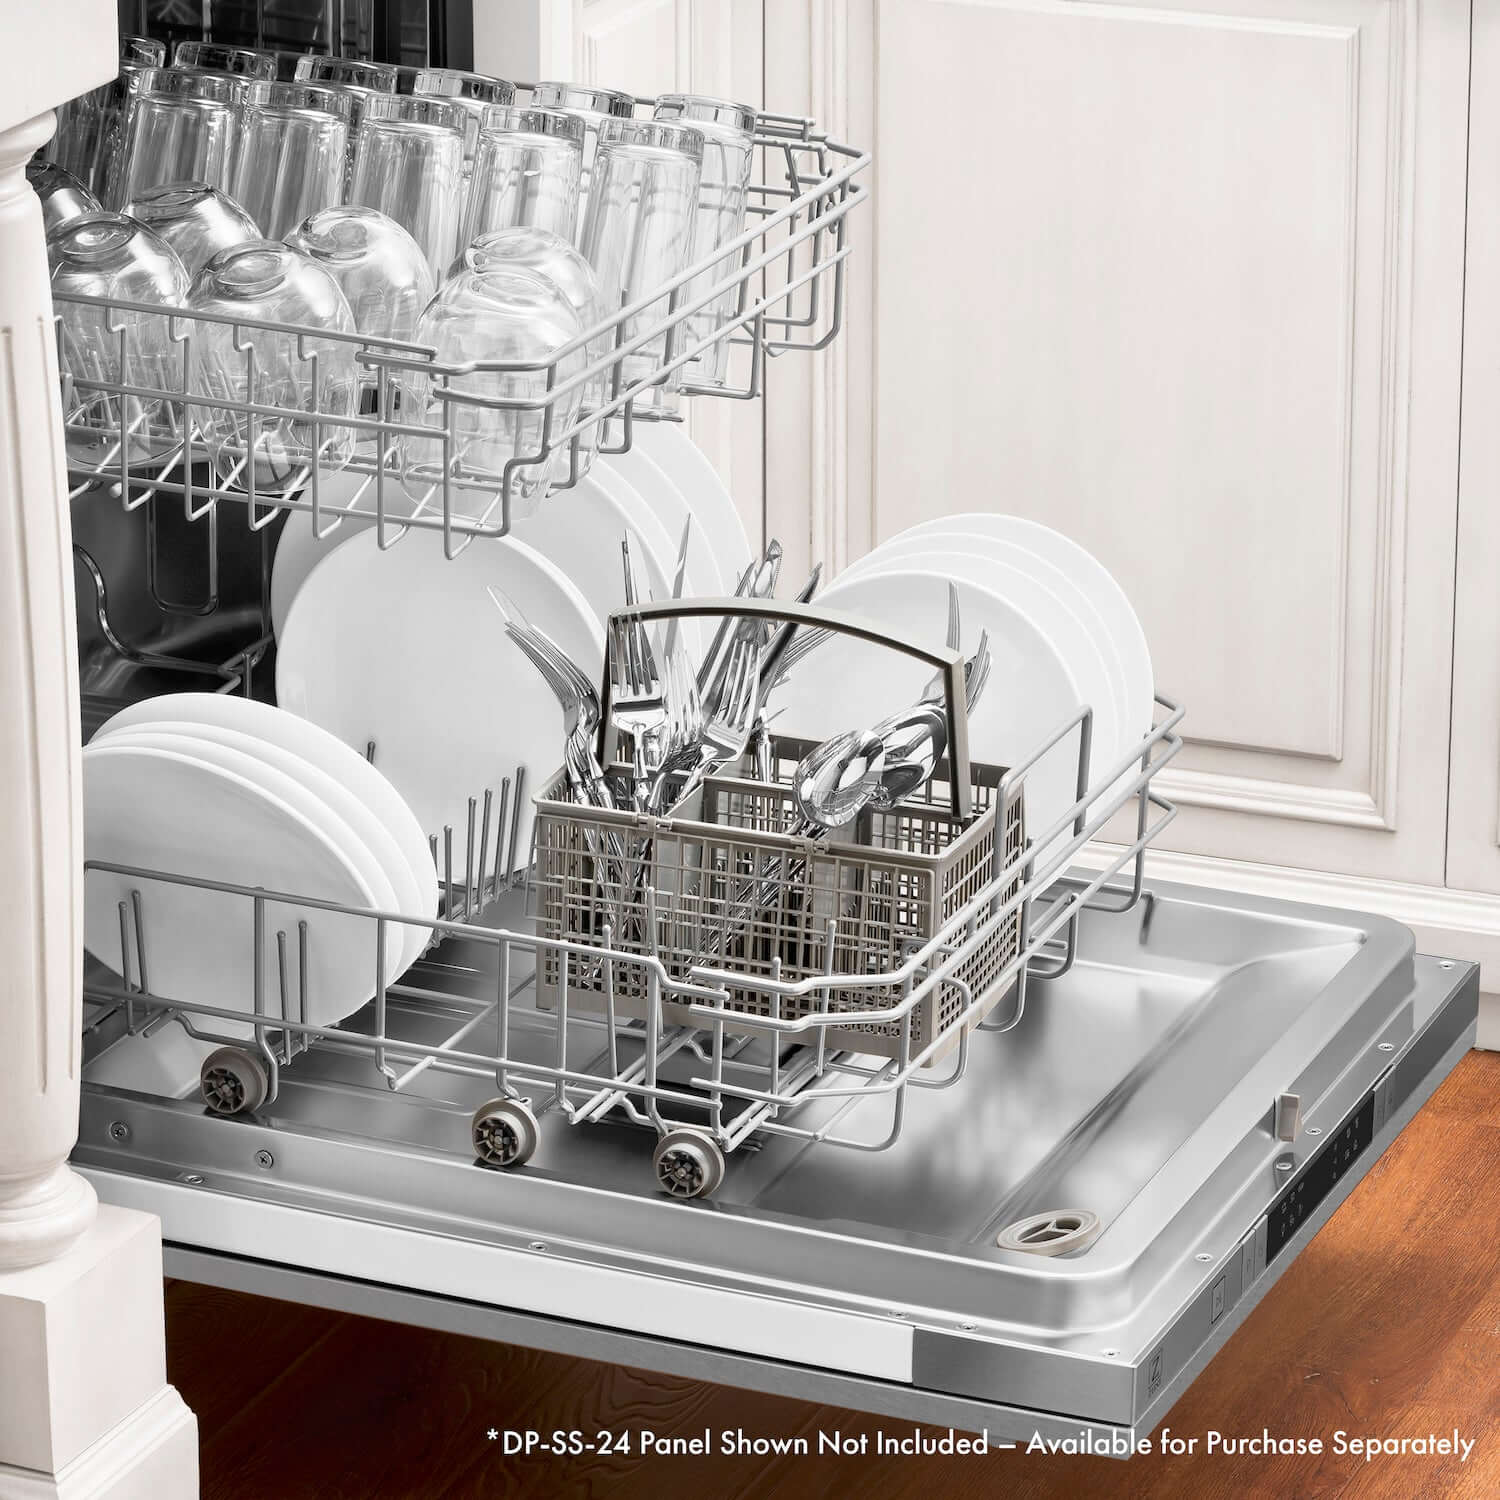 ZLINE 24 in. Panel Ready Top Control Built-In Dishwasher with Stainless Steel Tub, 52dBa (DW7713-24)